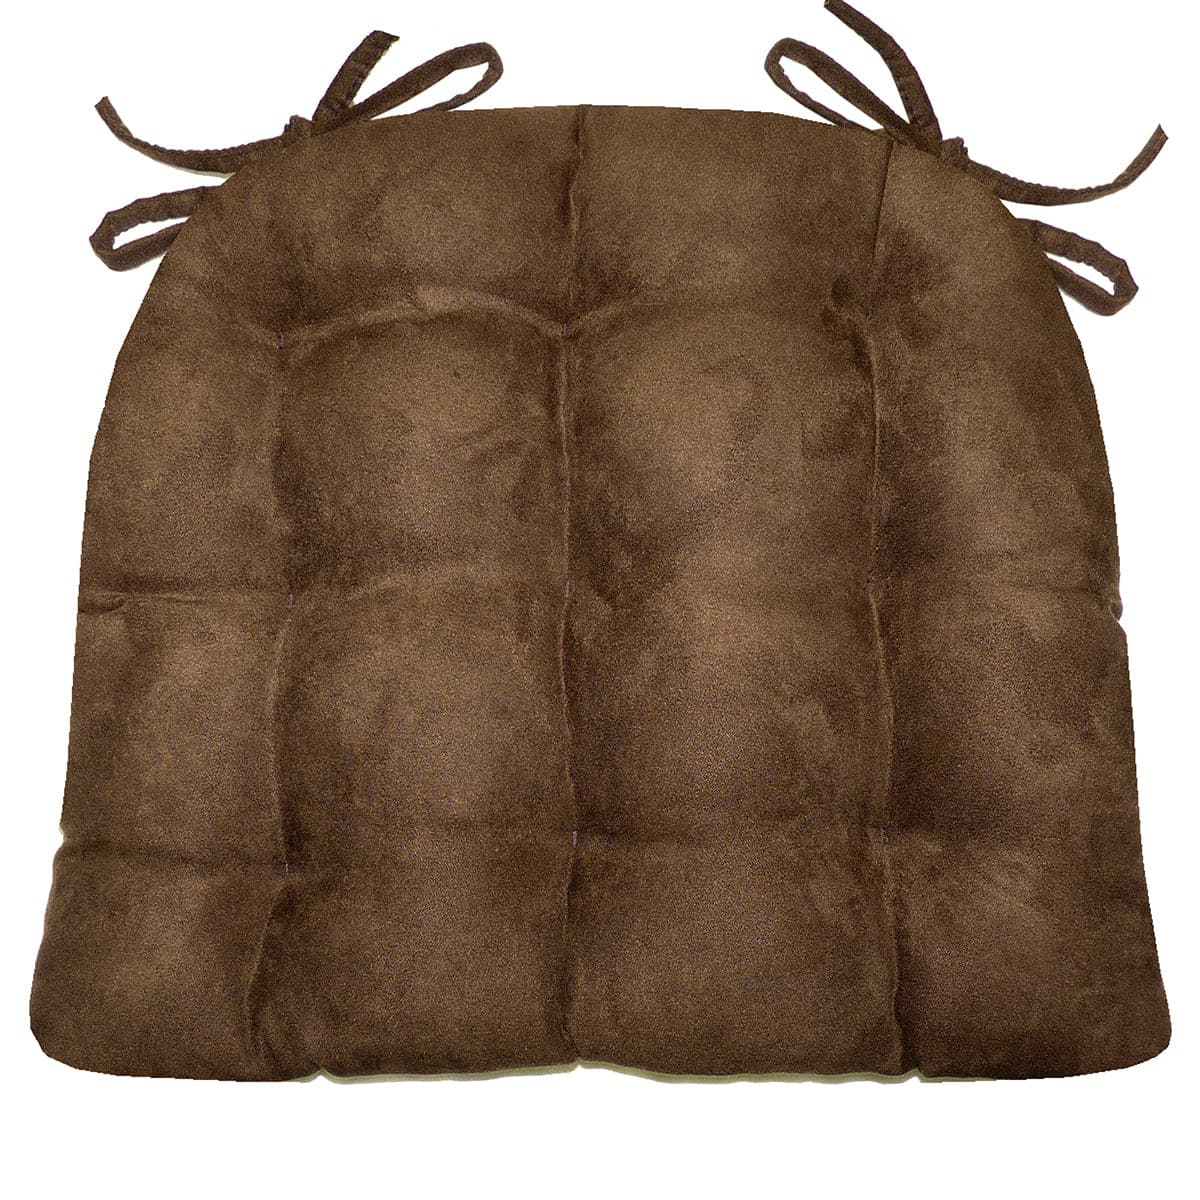 Woodlands Fairbanks Chair Cushion Reverse to Microsuede Brown